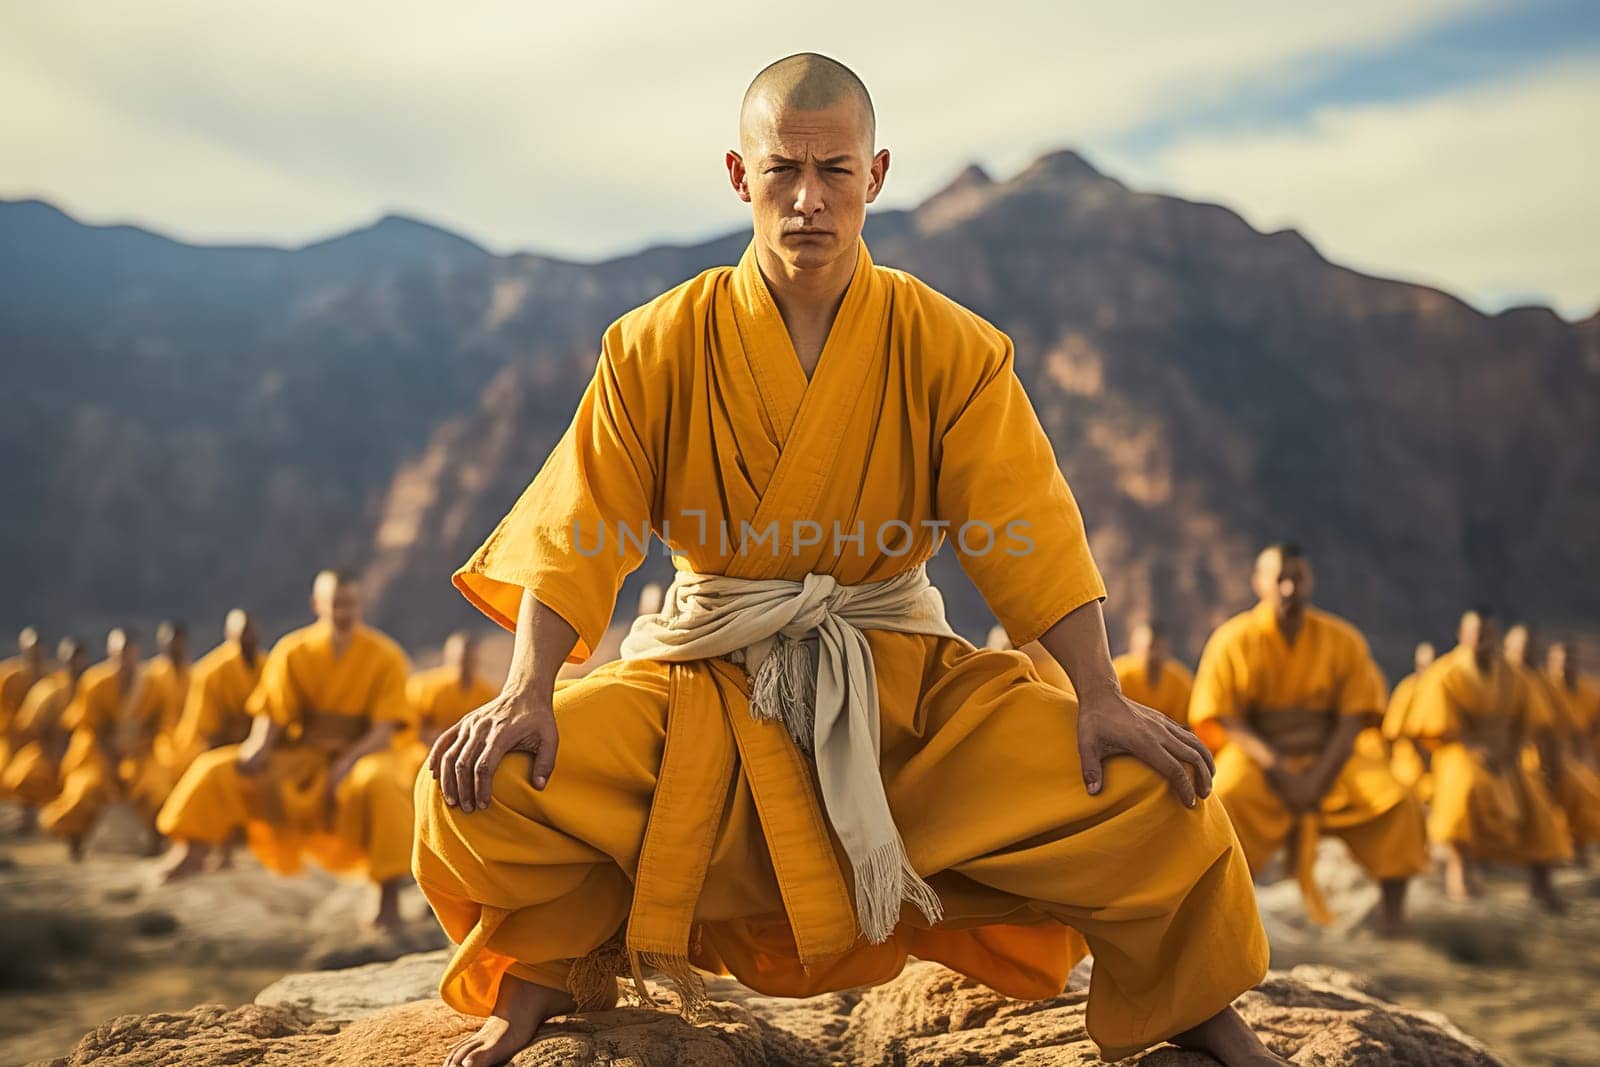 A shaolin monk trains with a group of students outdoors. by Yurich32